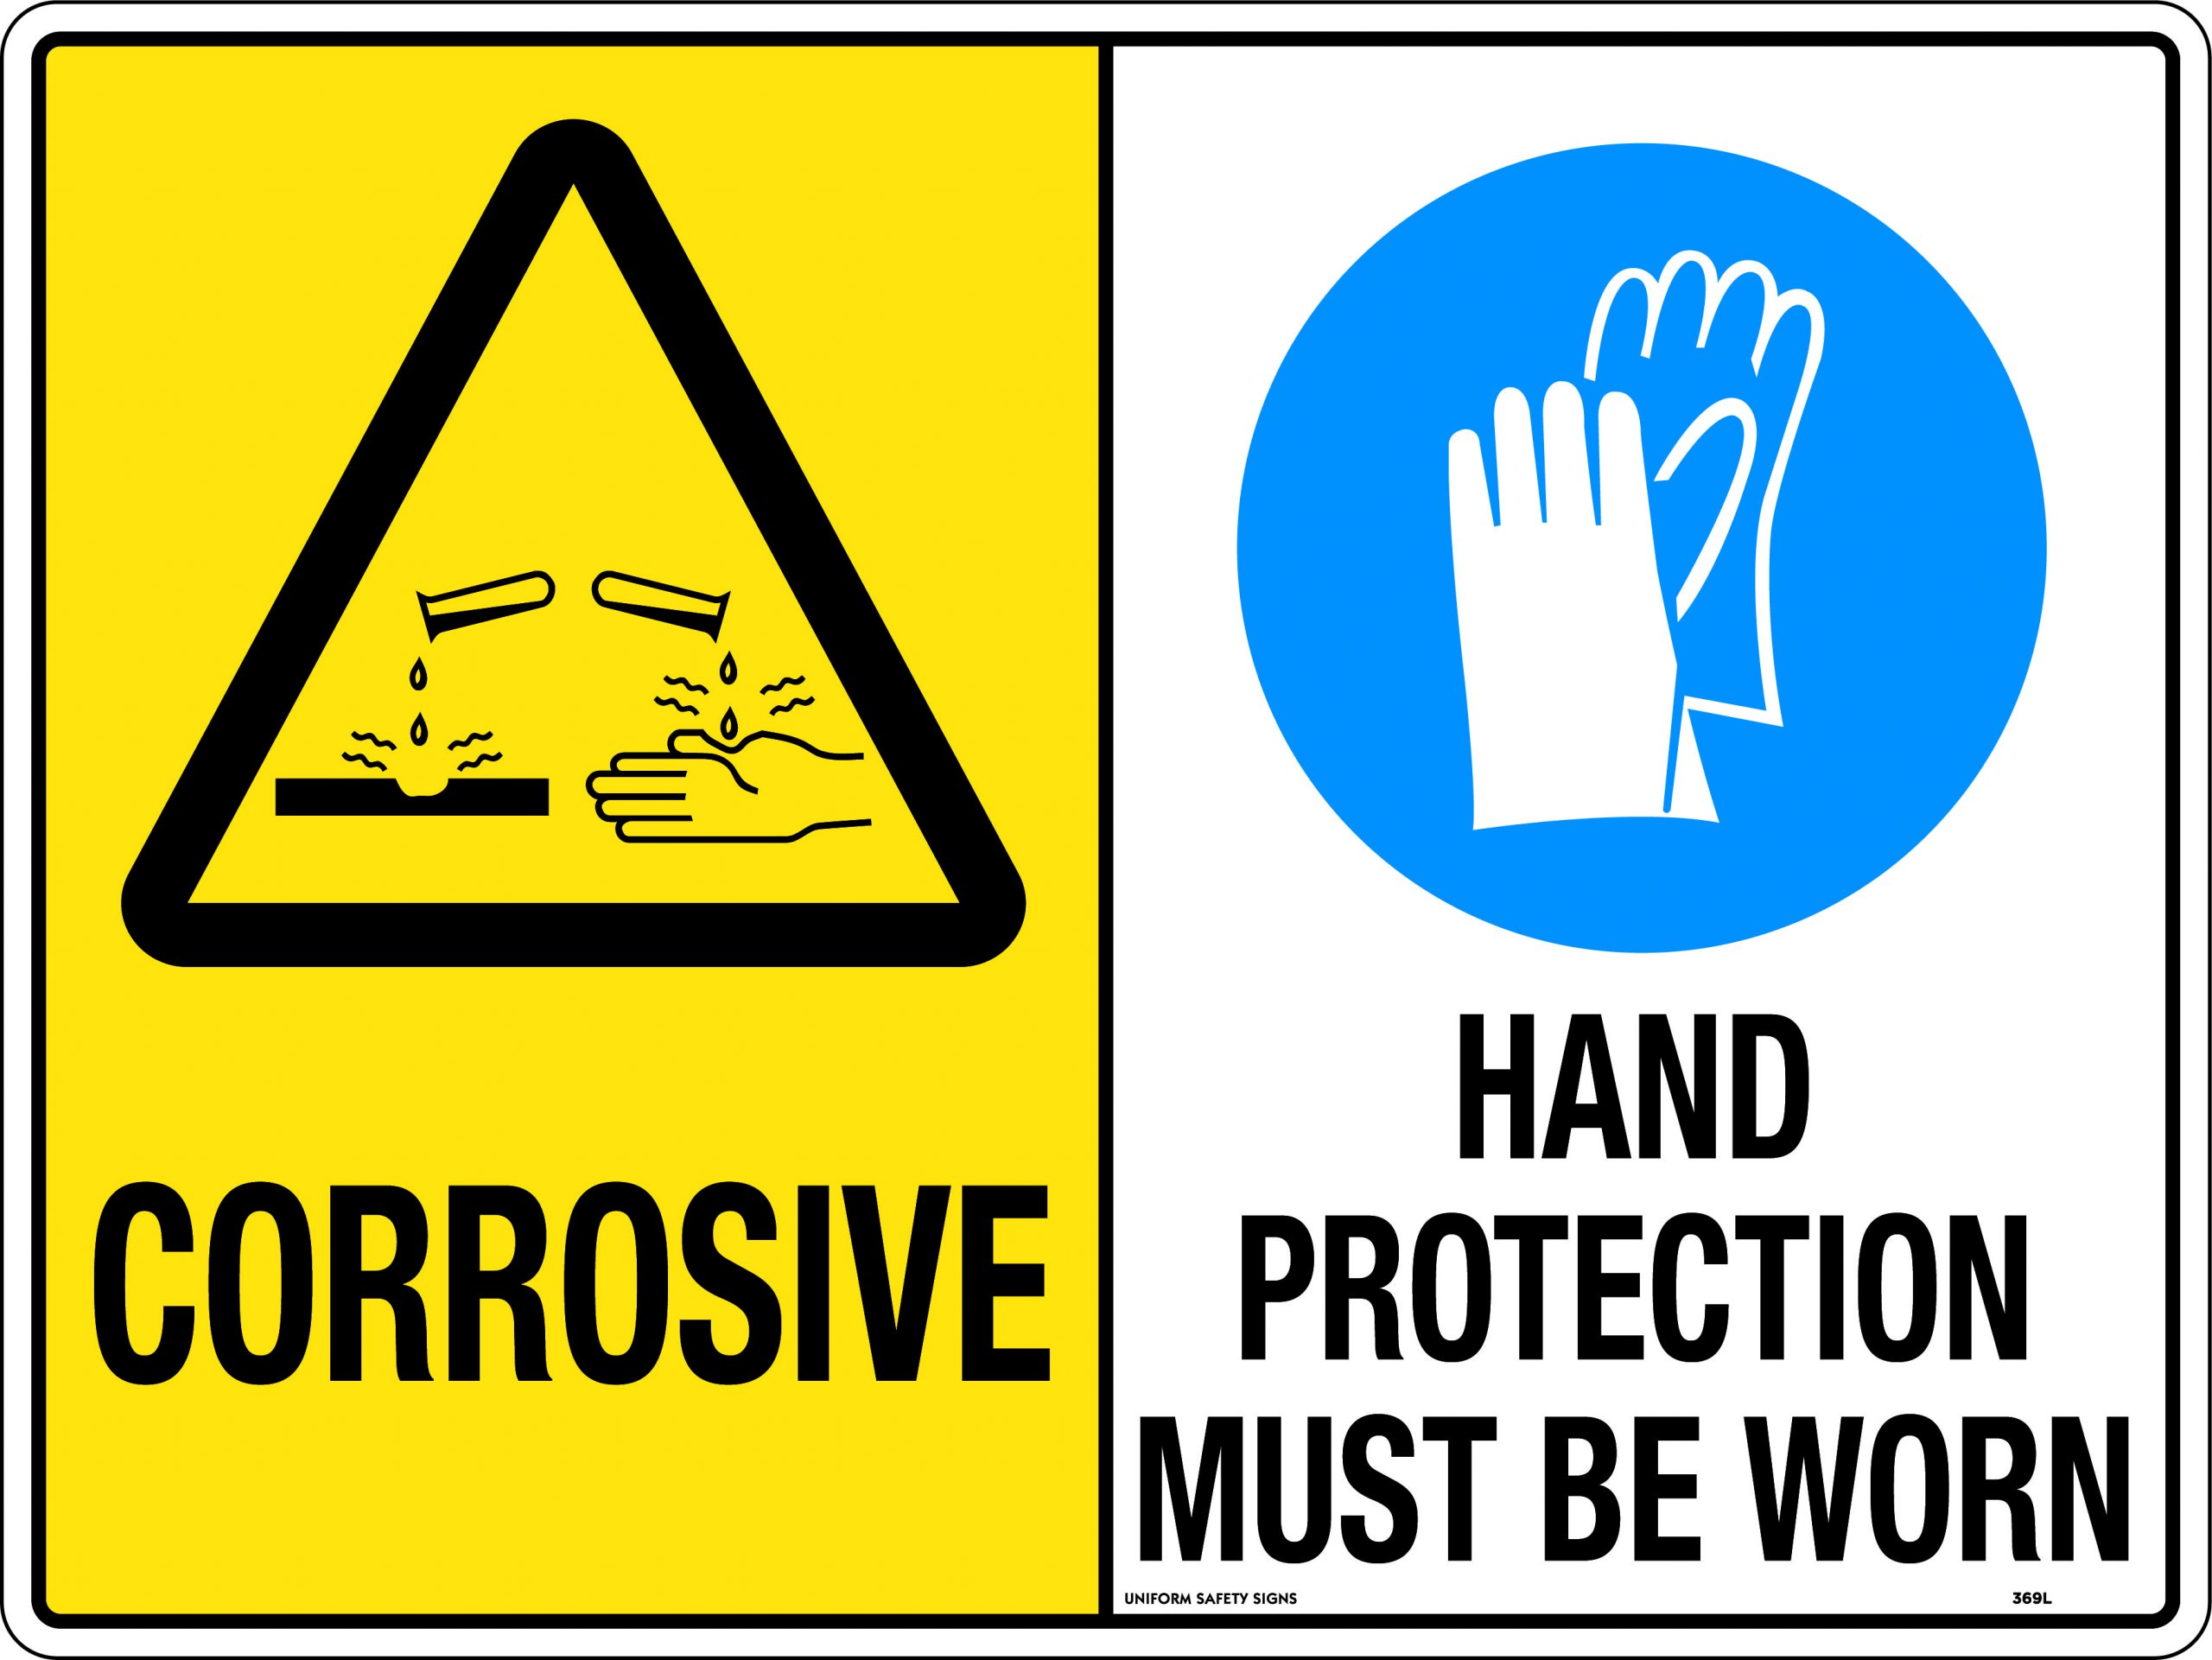 UNIFORM SAFETY 450X300MM POLY MULTI SIGN CORROSIVE/HAND PROTECTION MUS